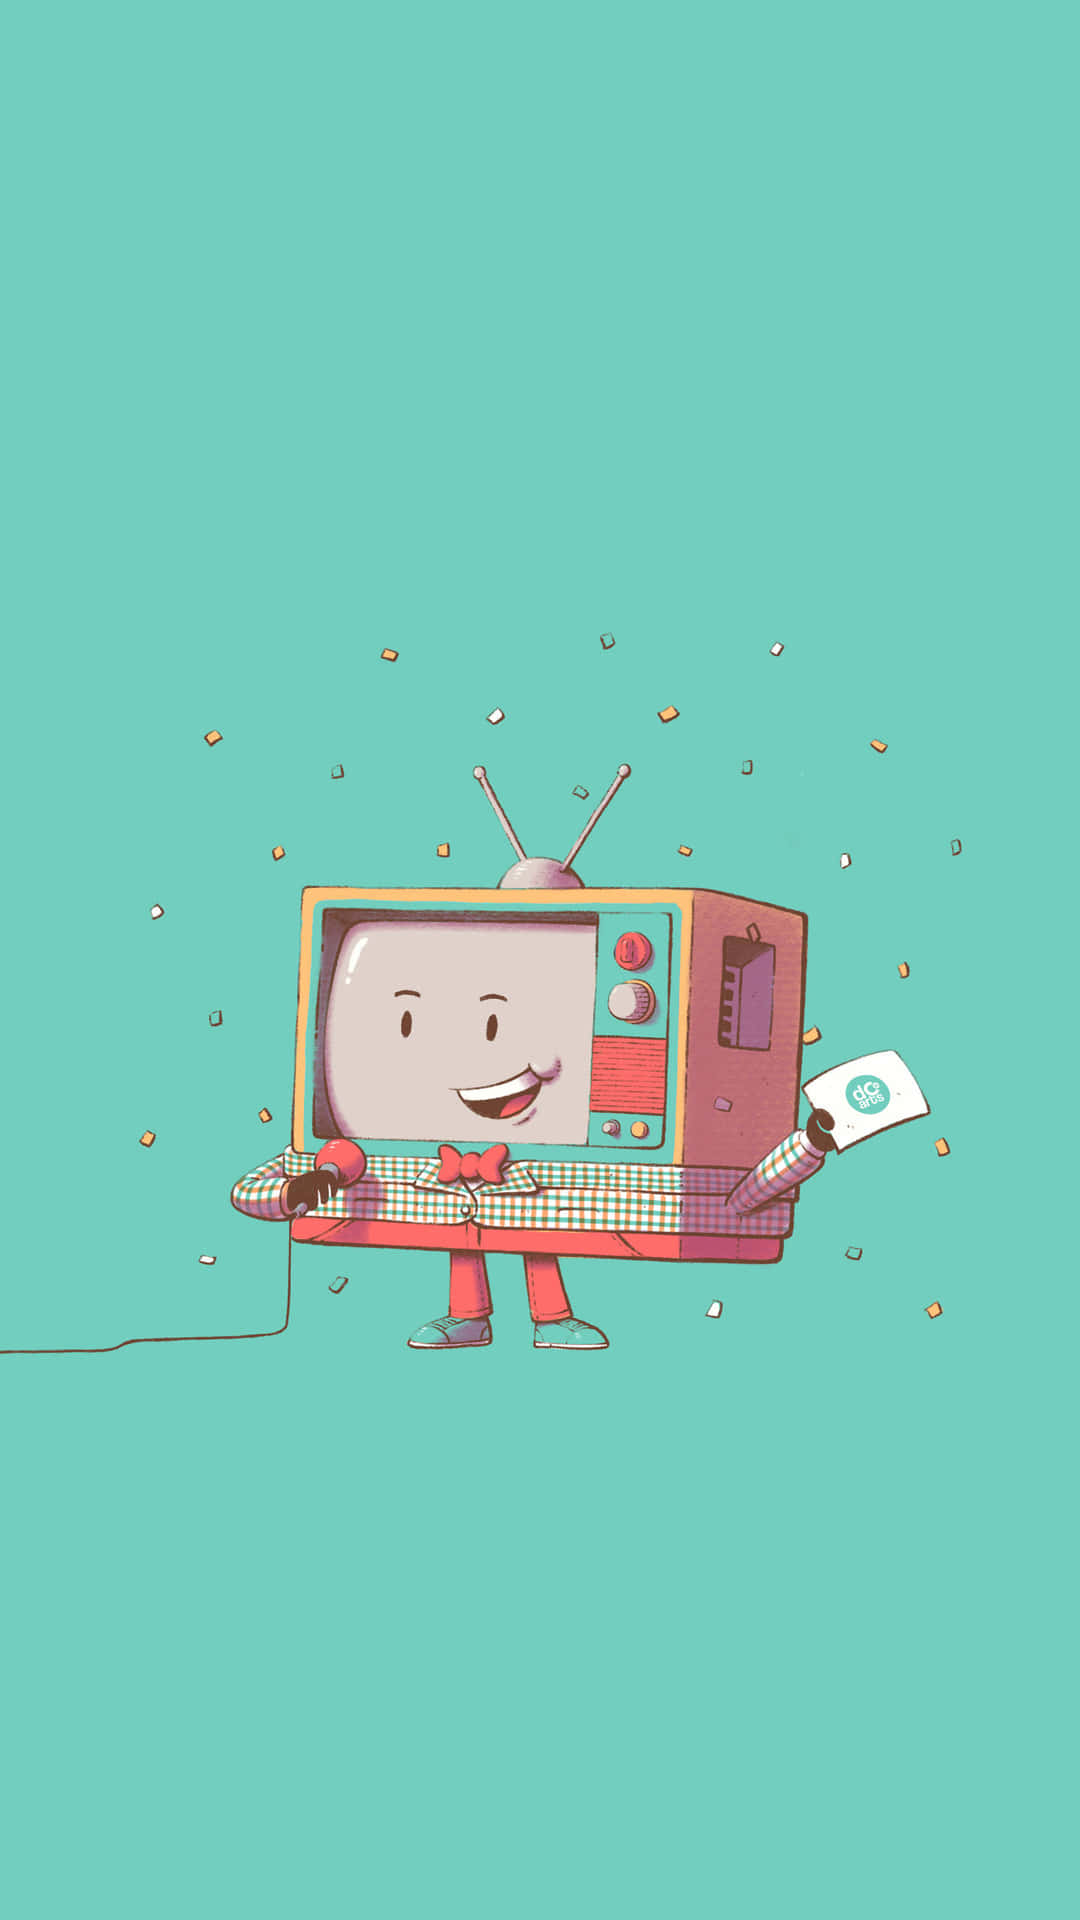 Cartoon Tv With A Man Holding A Remote Background